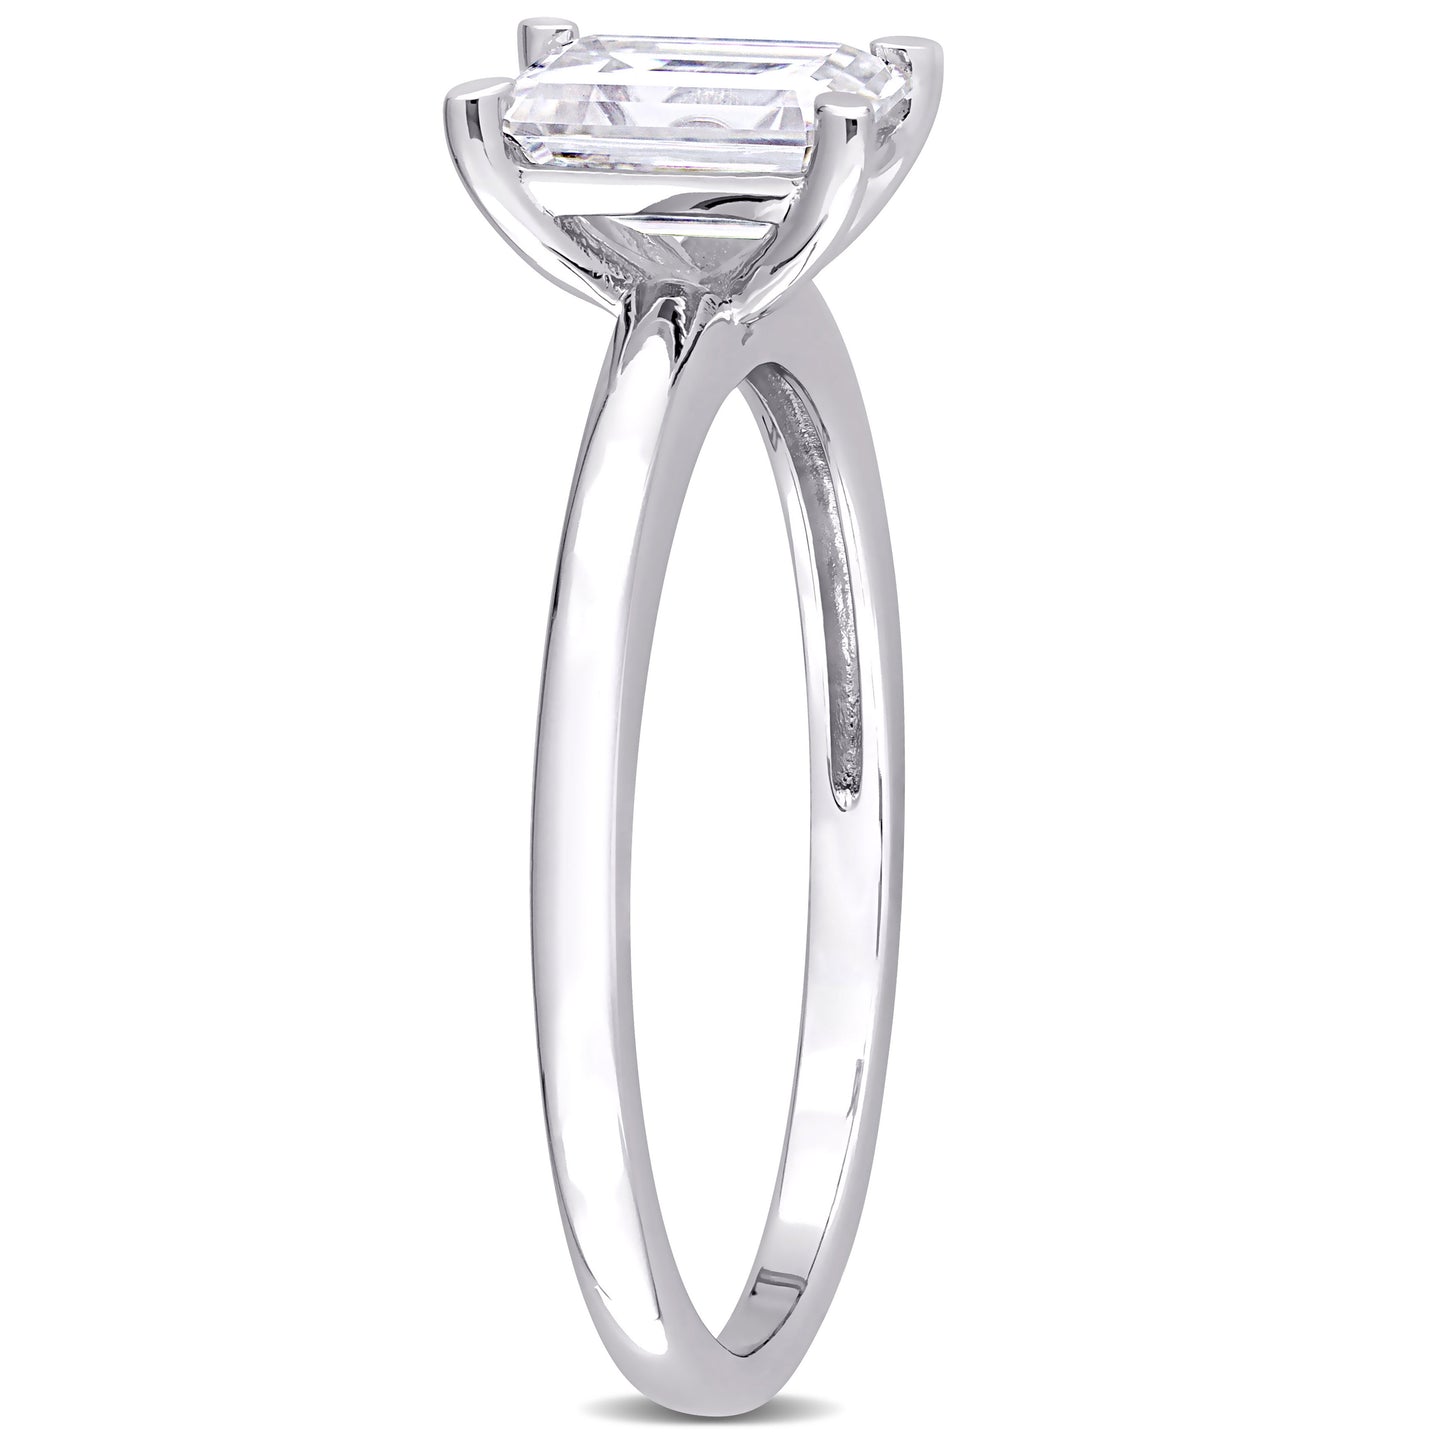 1ct Emerald Cut Moissanite Ring in Sterling Silver